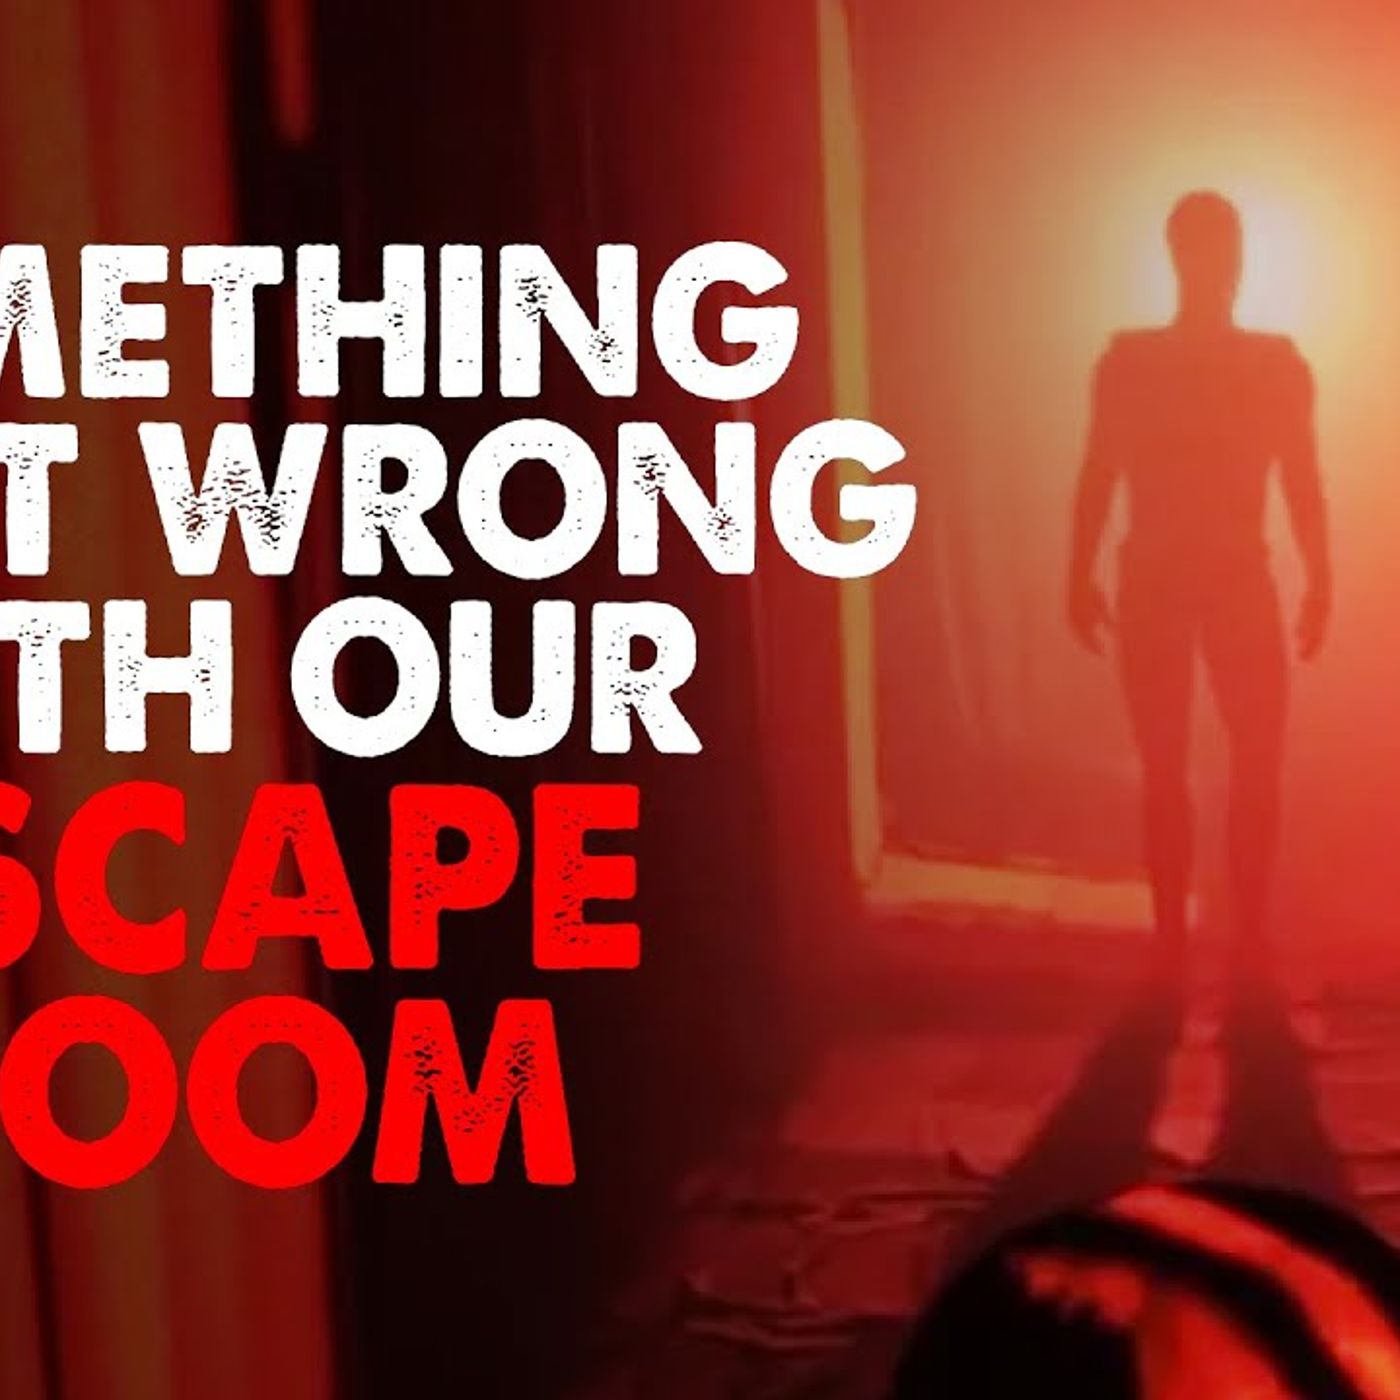 "Something went wrong with our escape room" Creepypasta